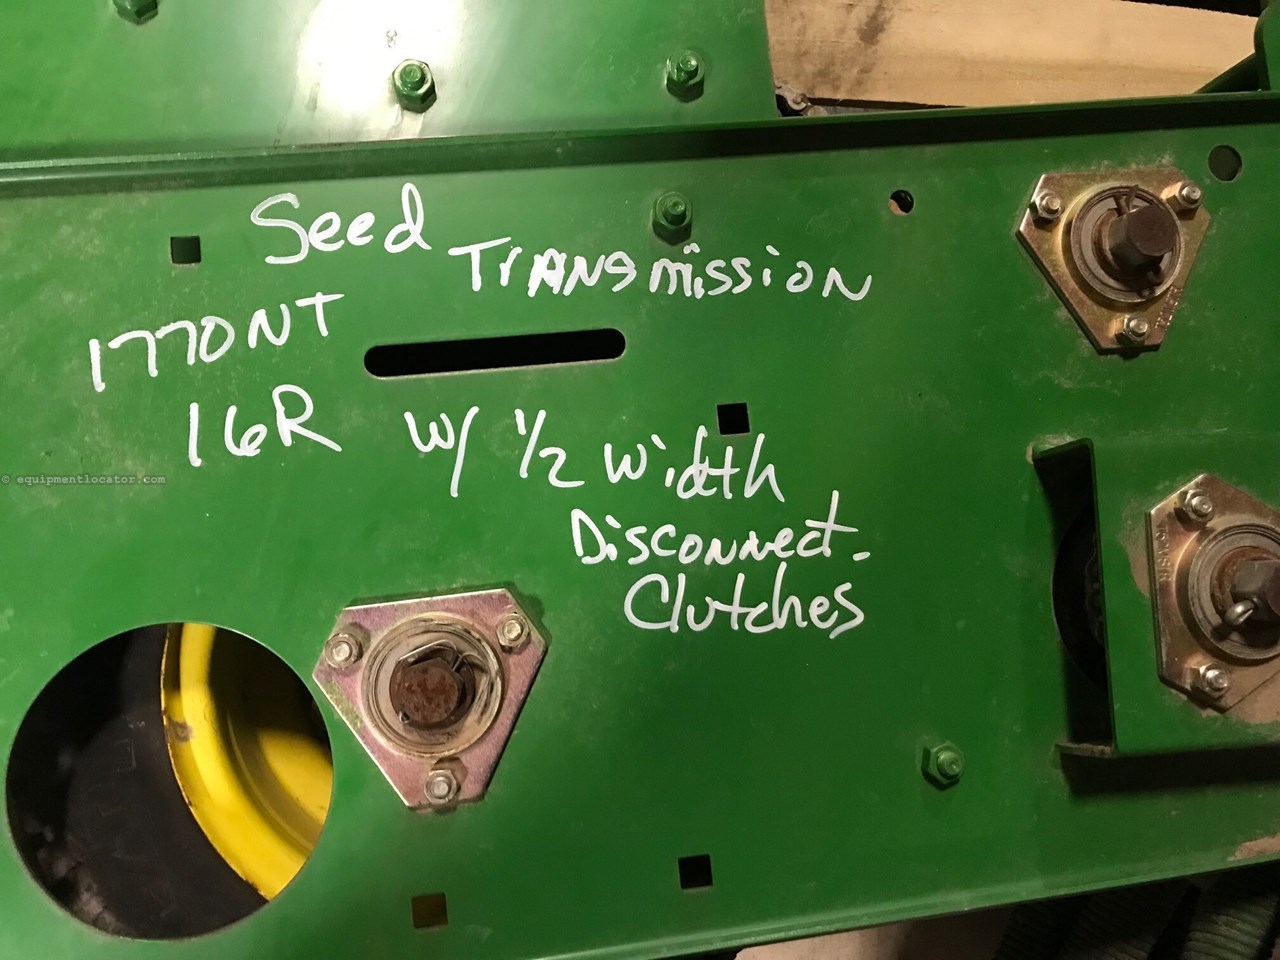 John Deere 16 Row Seed Transmission w/ 1/2 width clutches Image 1